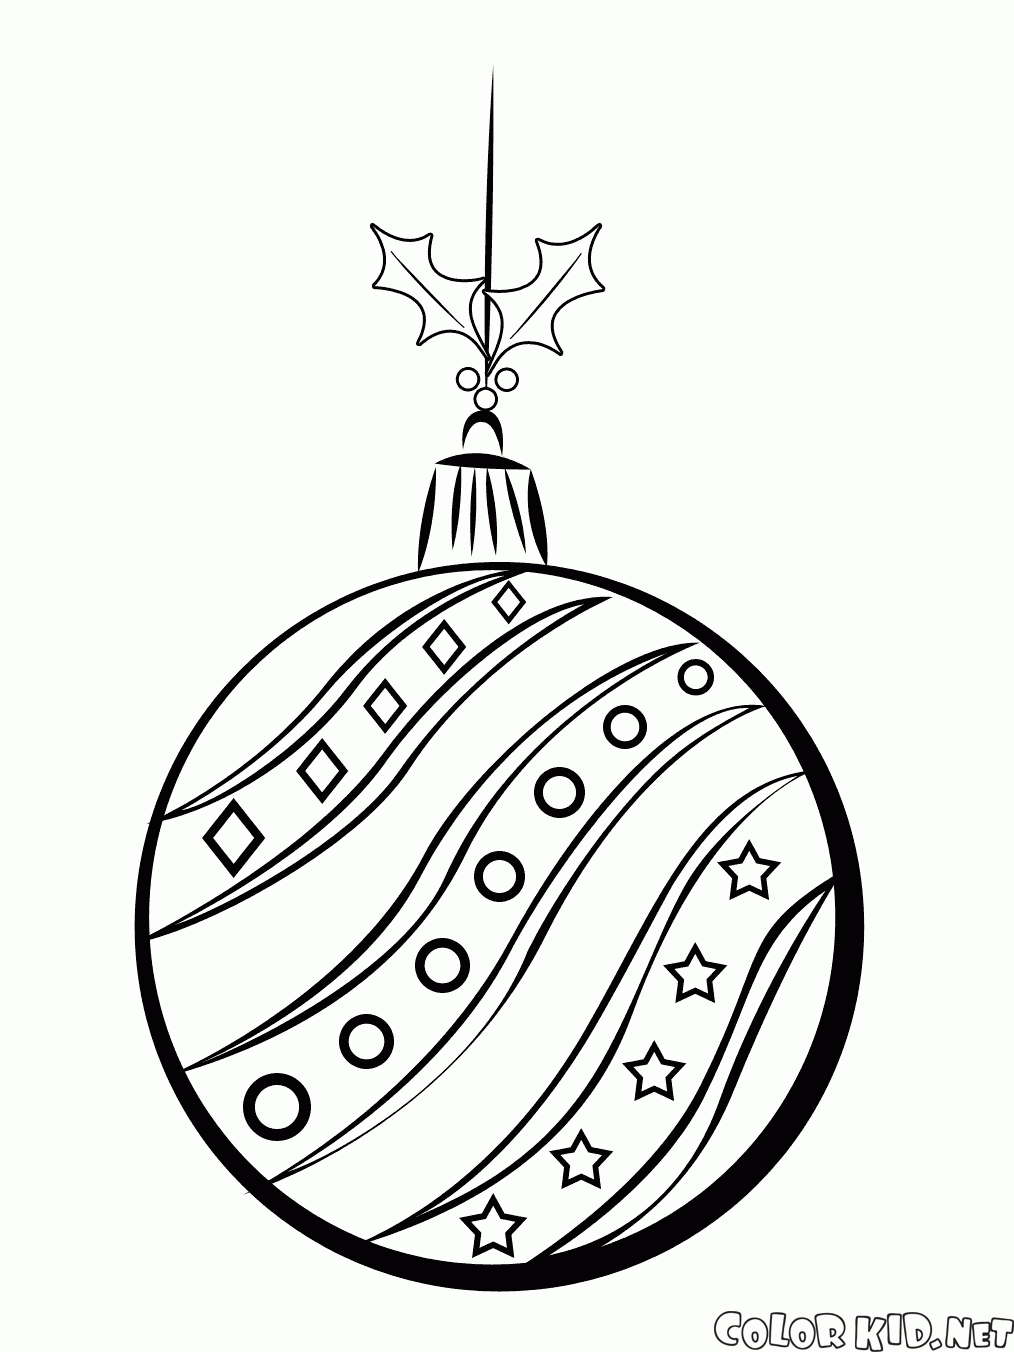 Coloring page - Christmas tree ball on a string